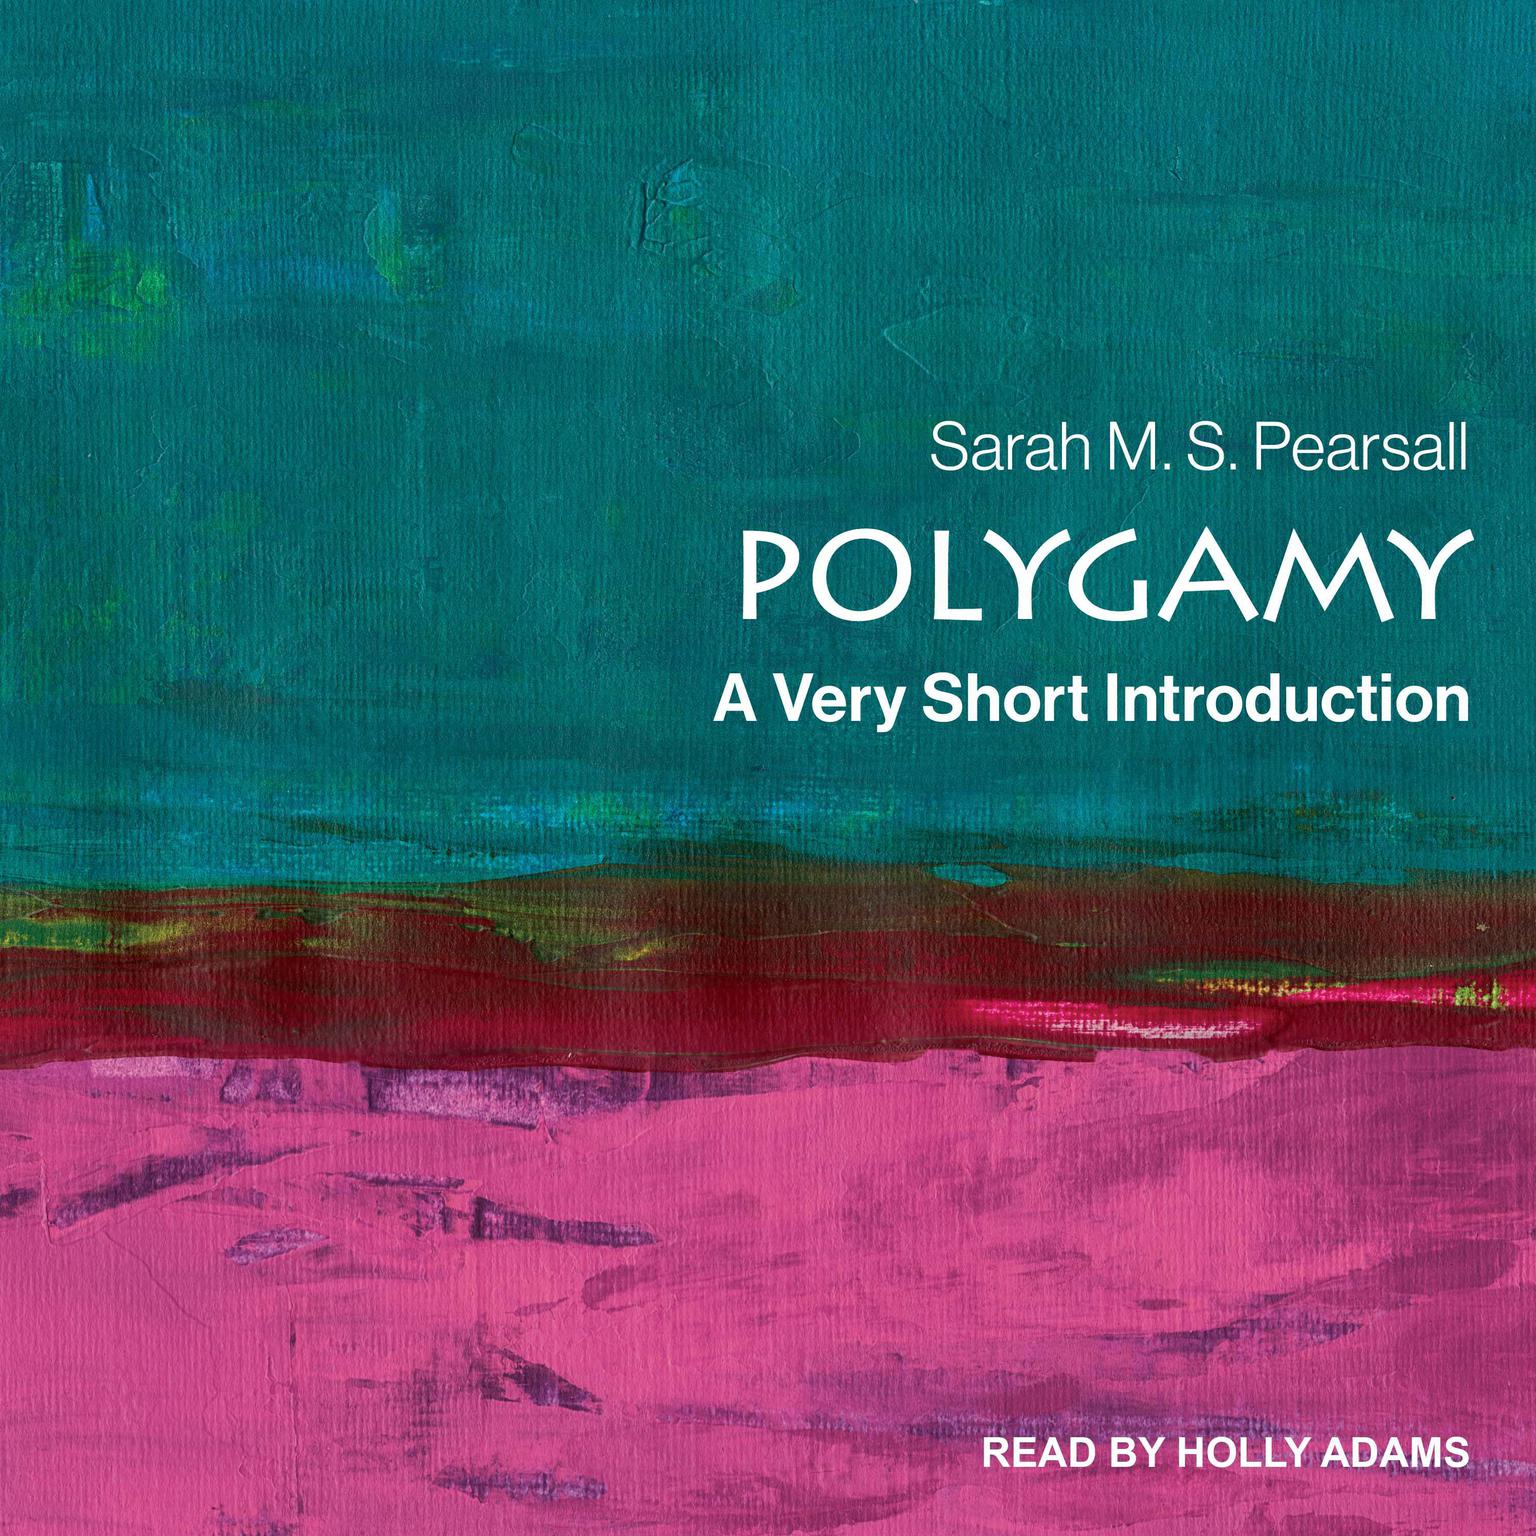 Polygamy: A Very Short Introduction Audiobook, by Sarah M.S. Pearsall